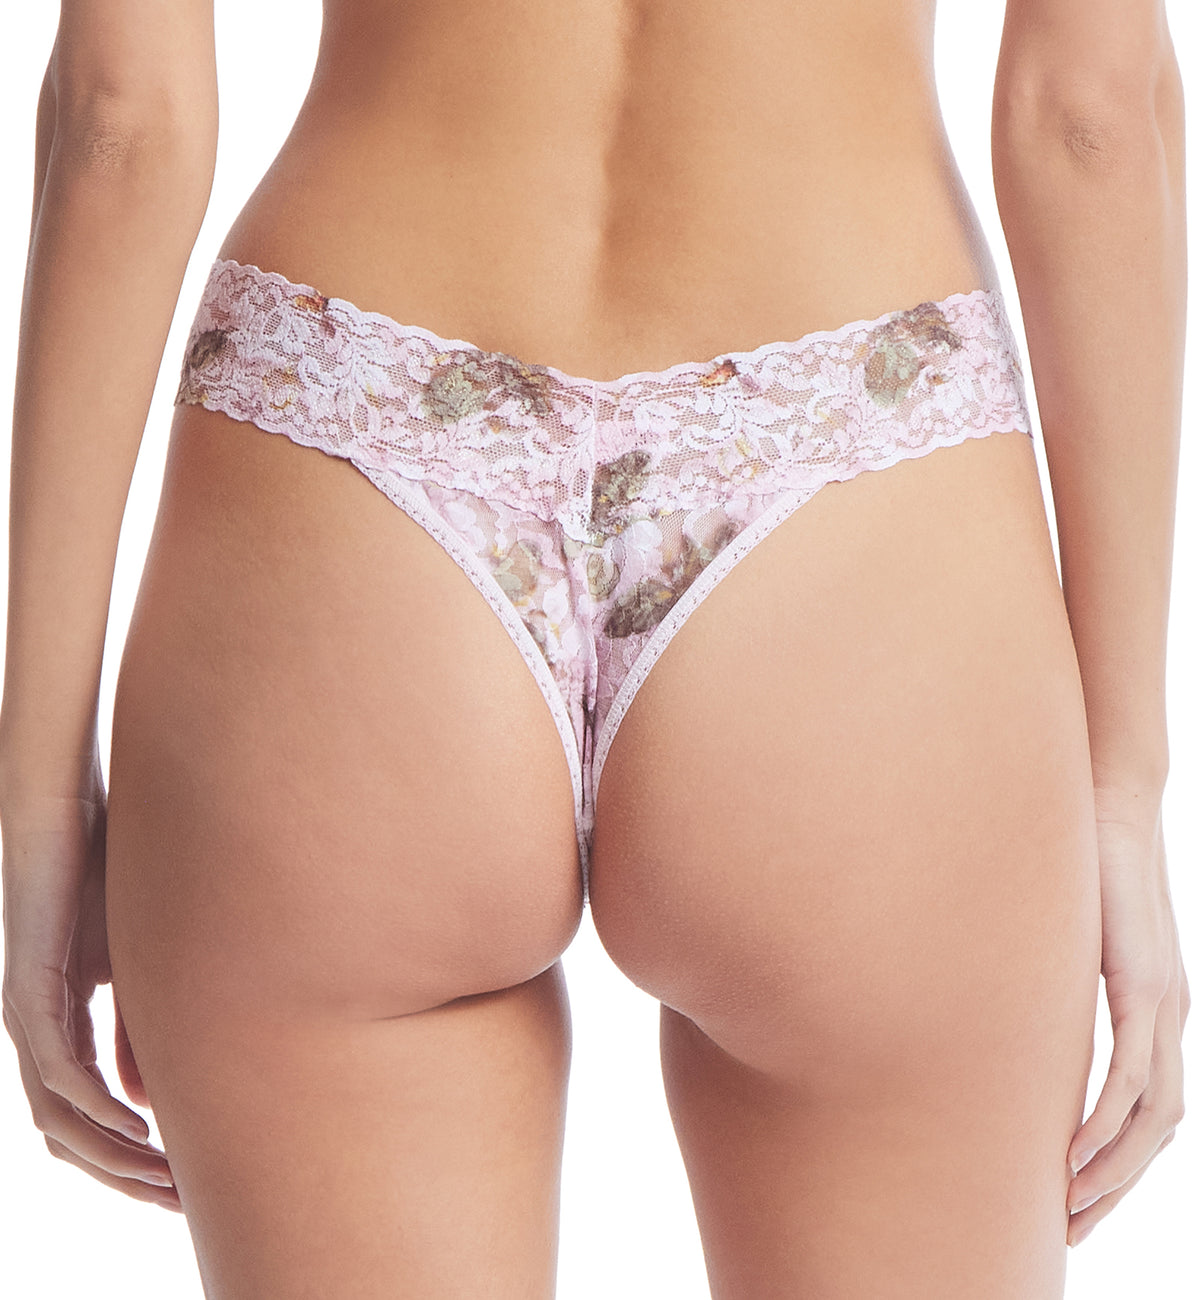 Hanky Panky Signature Lace Printed Original Rise Thong (PR4811P),Antique Lily - Antique Lily,One Size